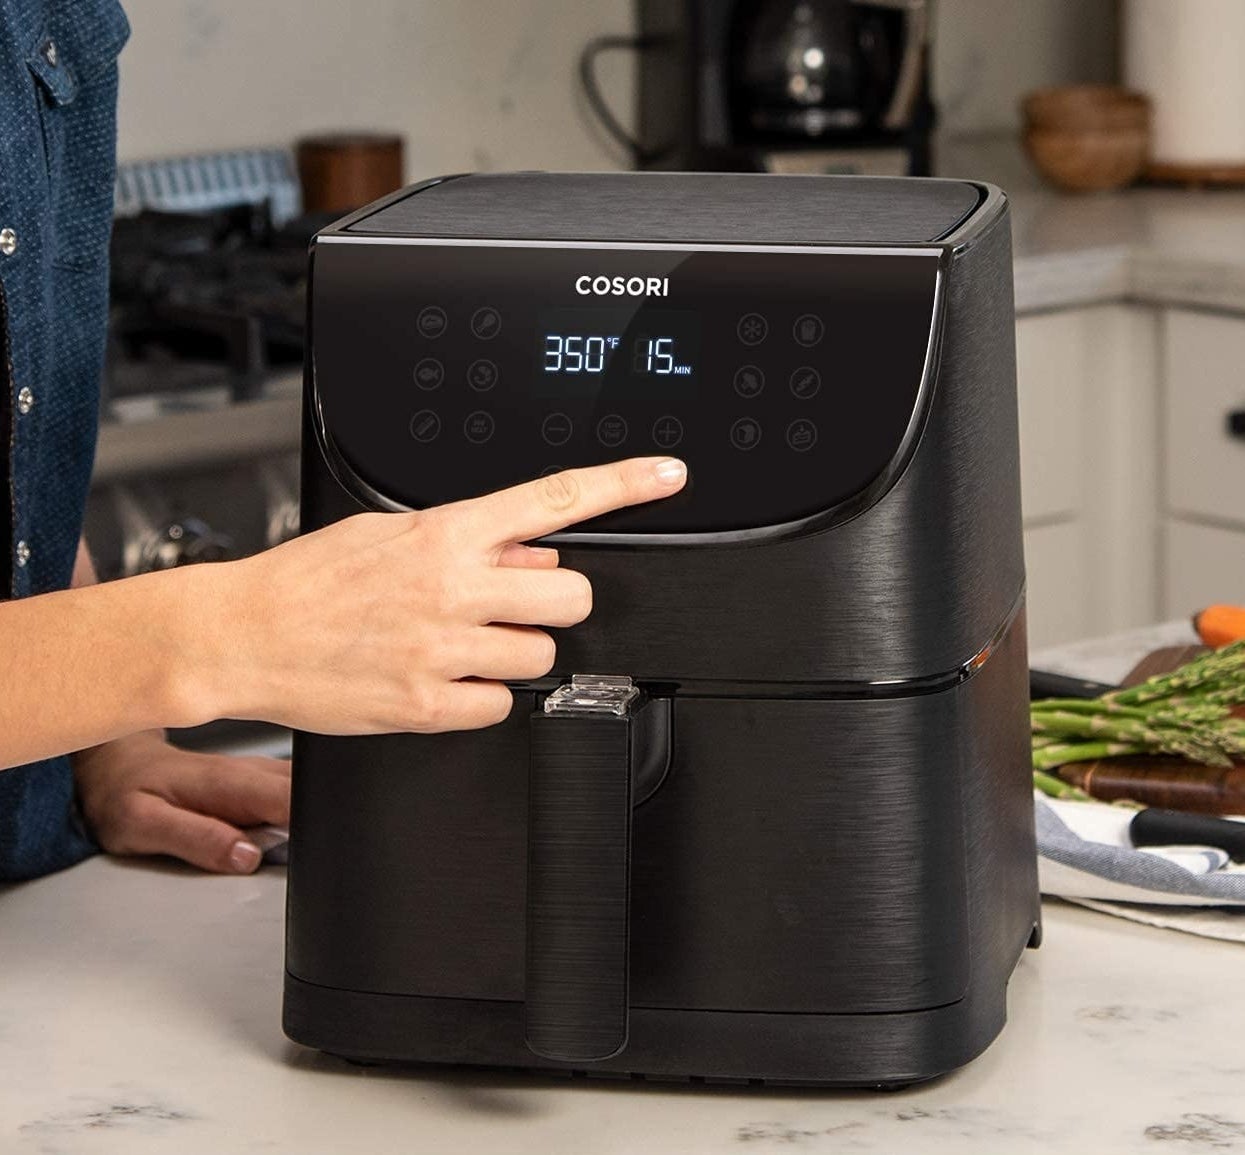 A person pressing a button on the face of the air fryer